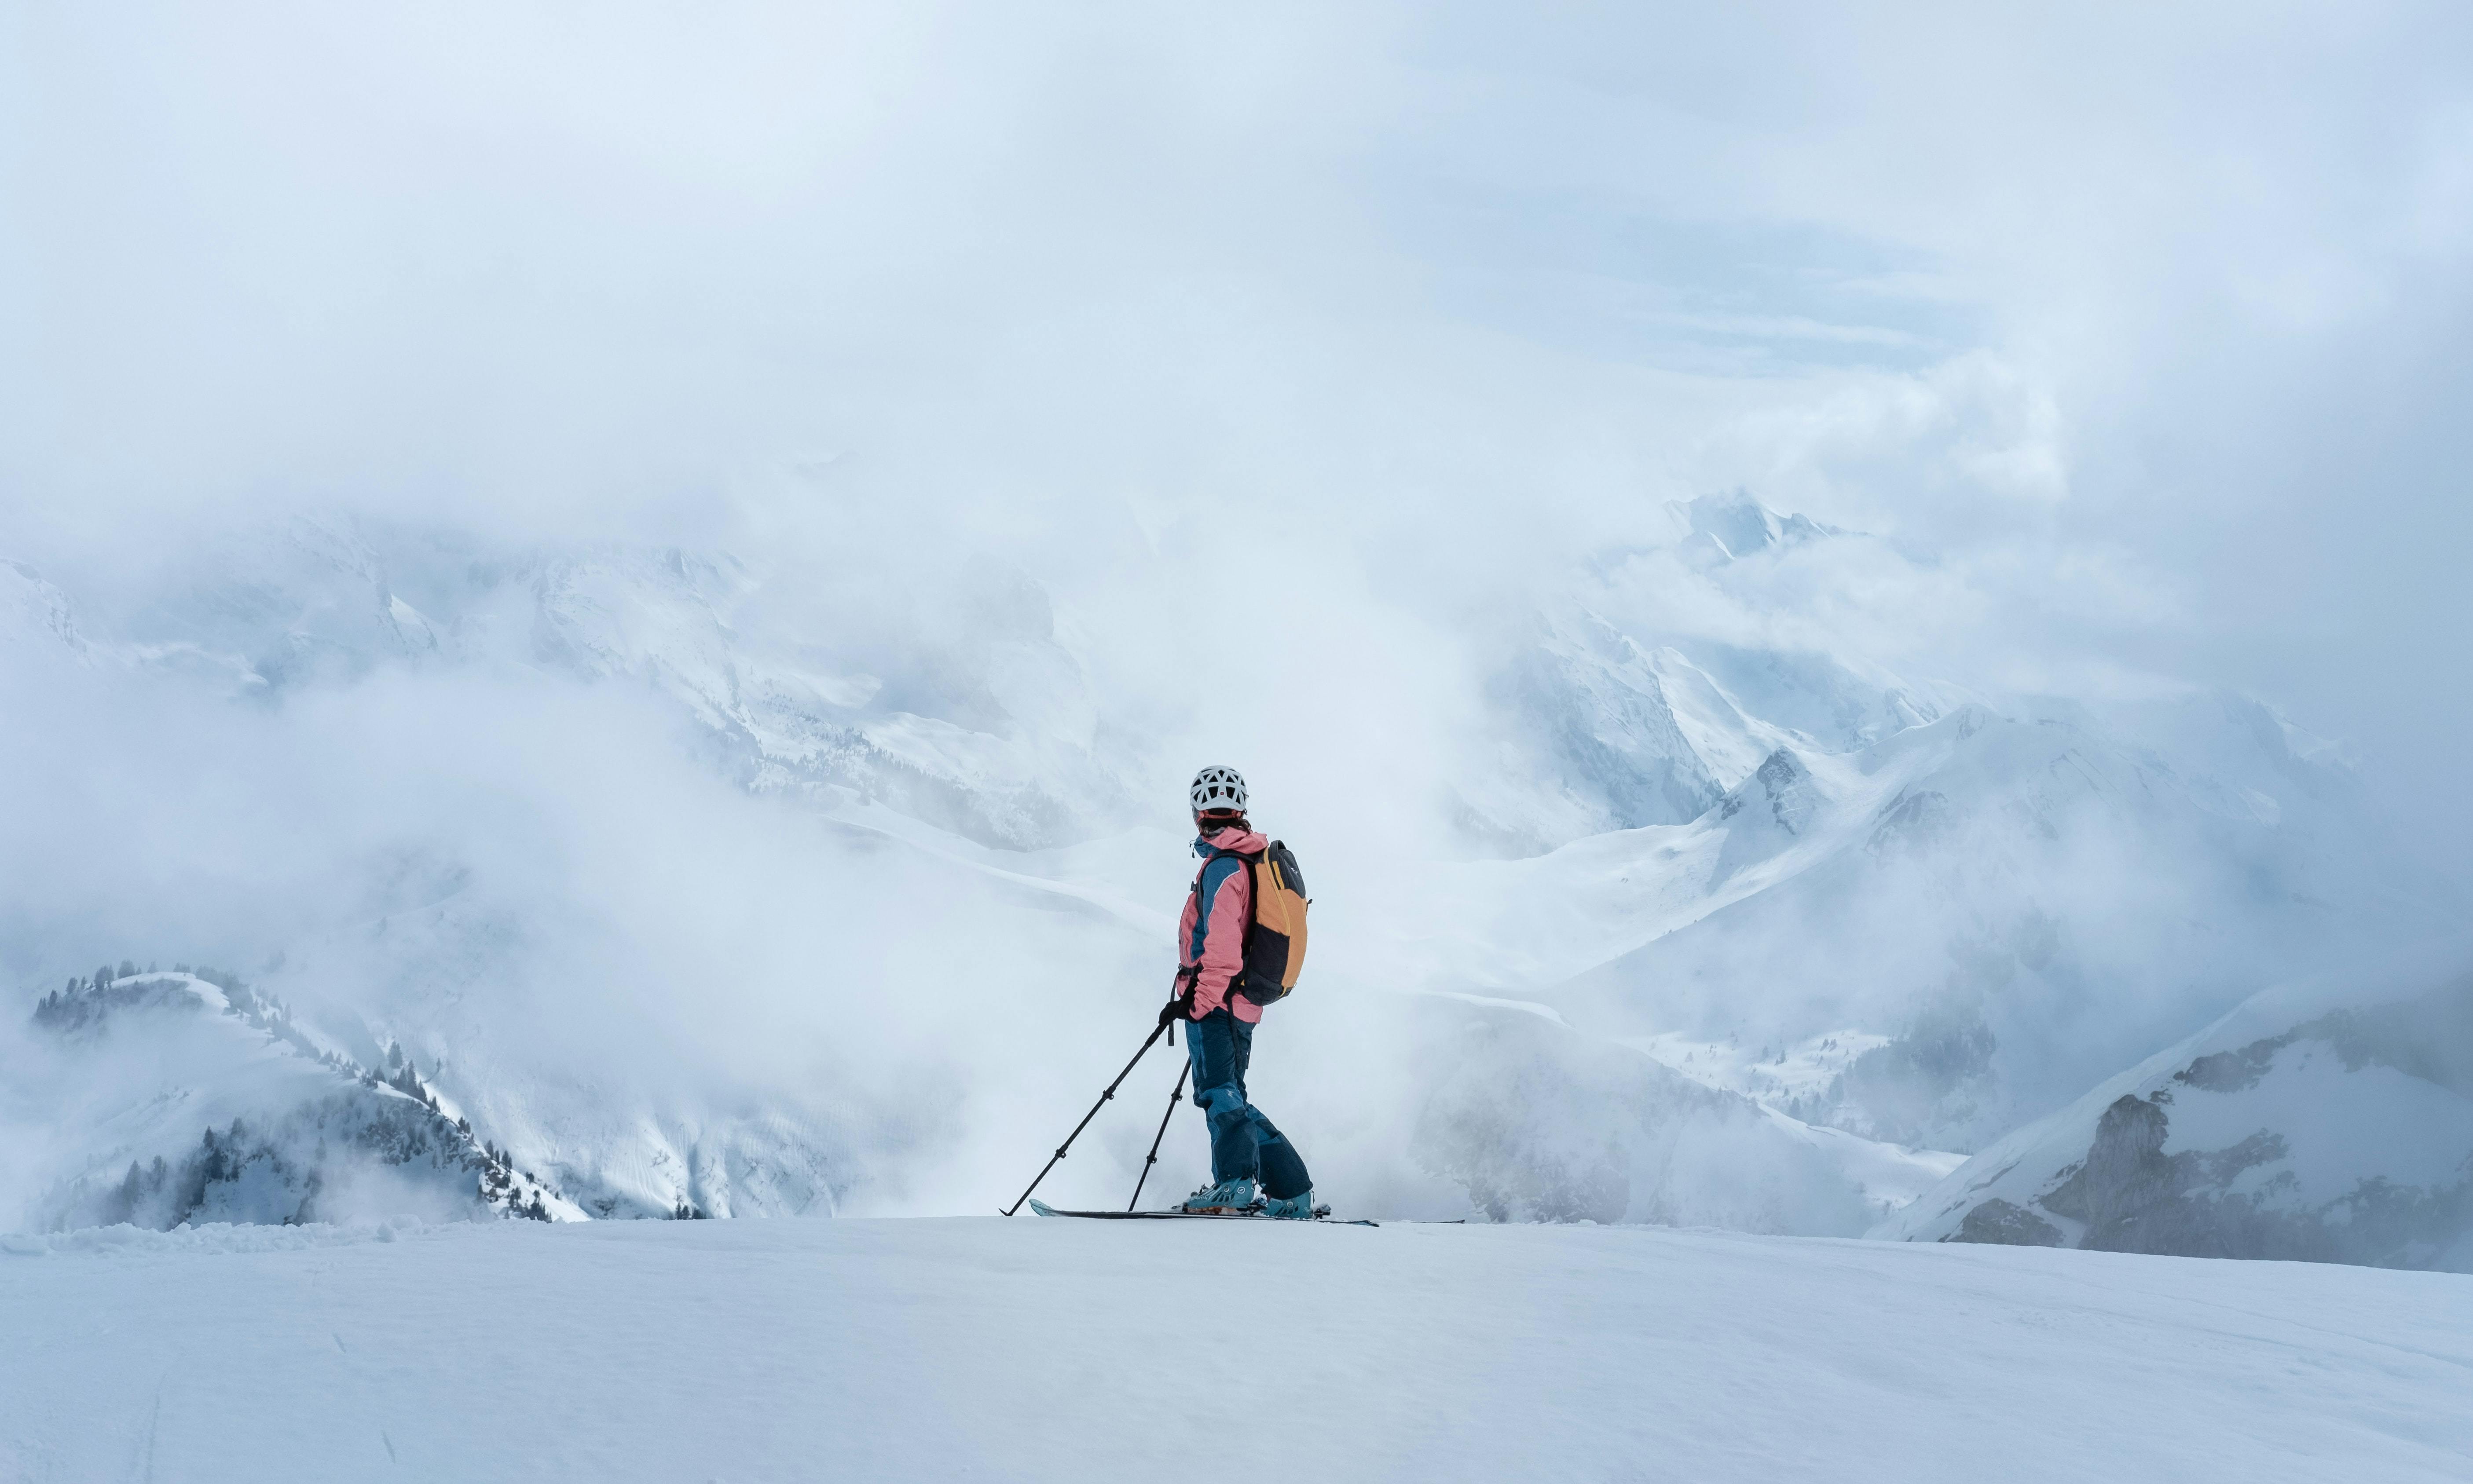 A skier stands at the top of the run. The mountains in the background are cloudy and covered in snow.